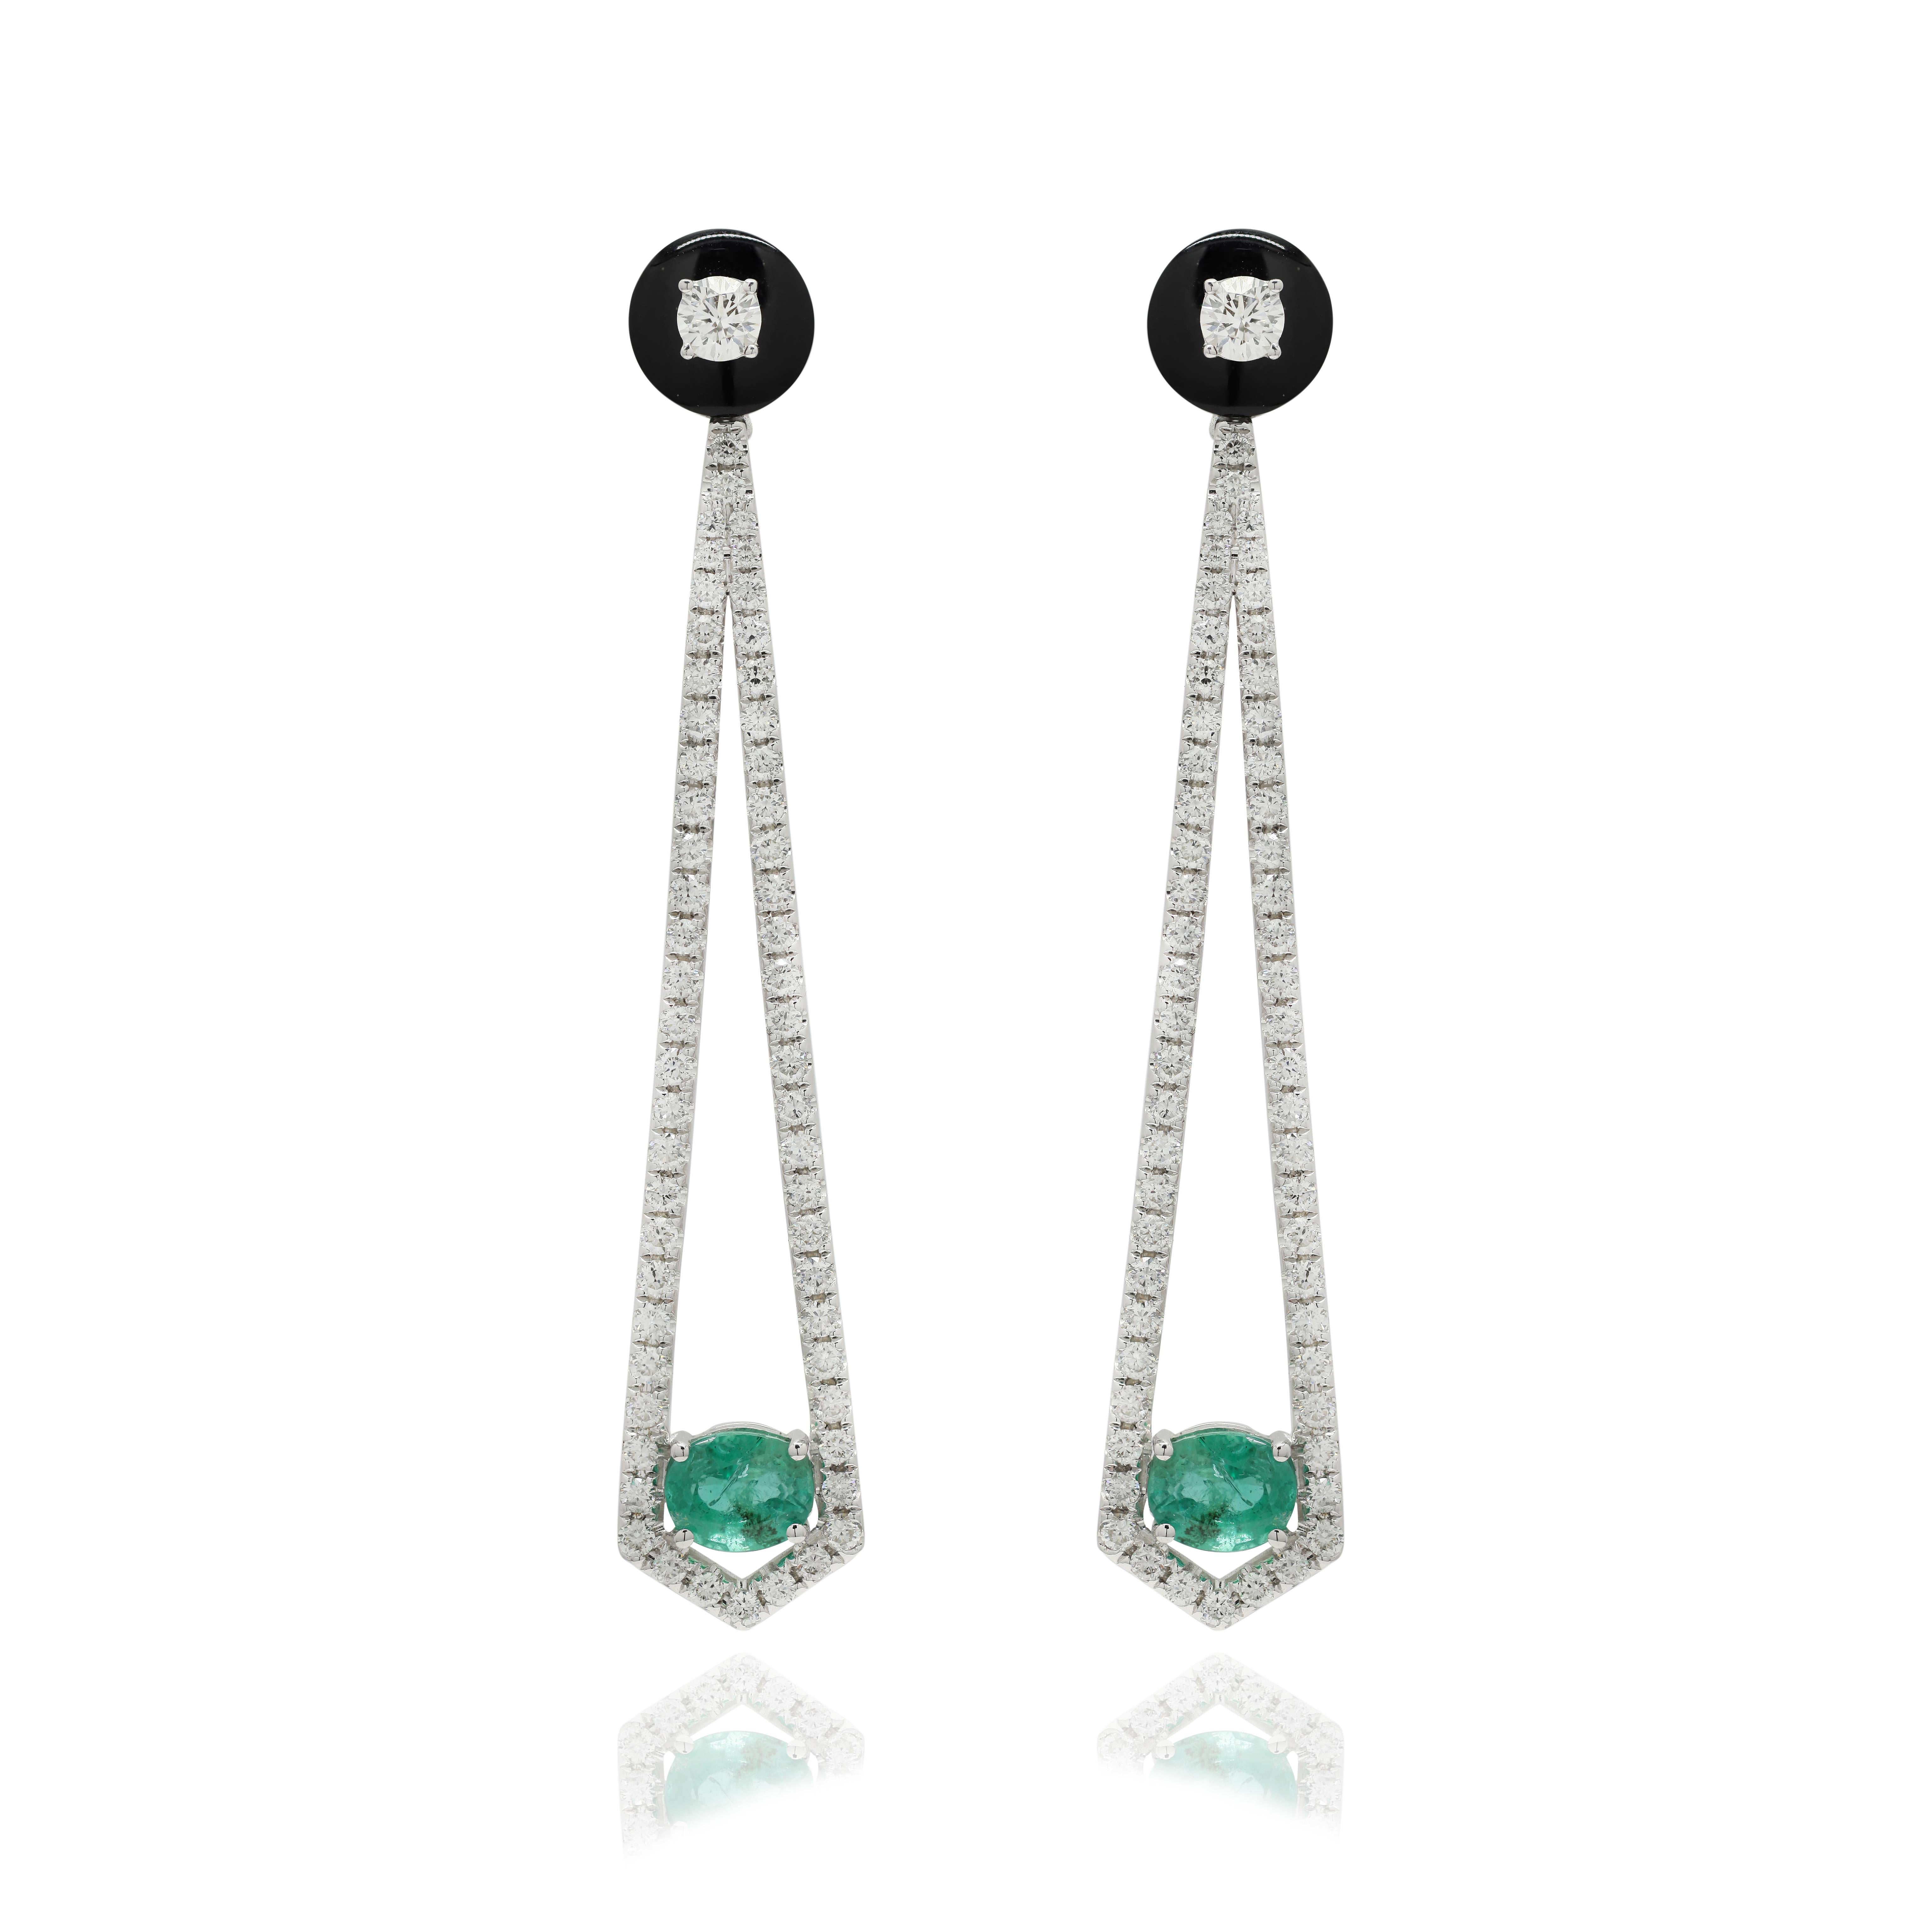 Designer Emerald and Diamond Long Dangle Earrings to make a statement with your look. These earrings create a sparkling, luxurious look featuring oval cut gemstone.
If you love to gravitate towards unique styles, this piece of jewelry is perfect for